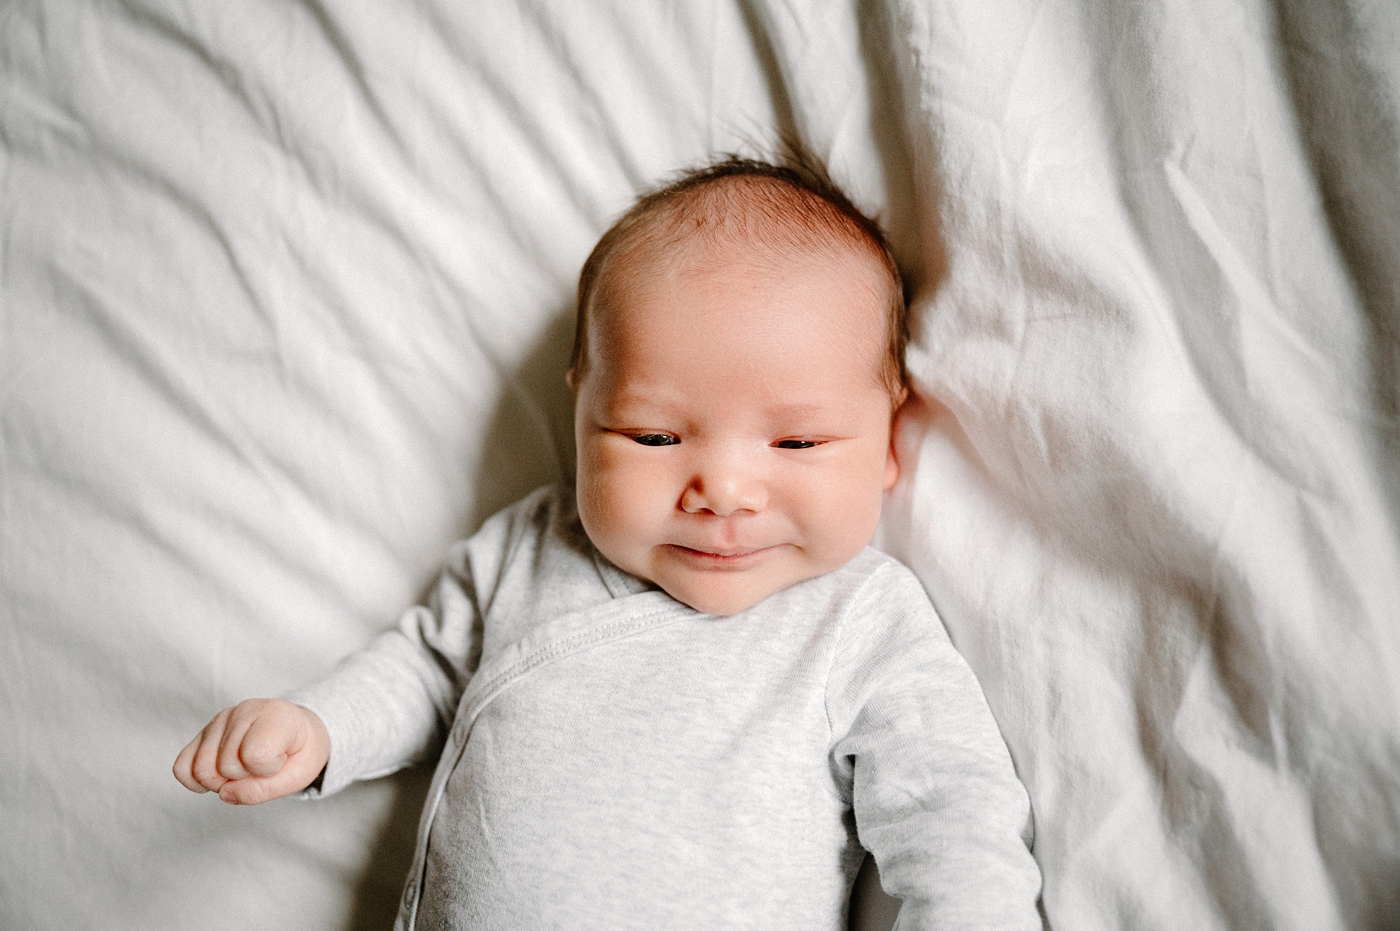 Newborn baby boy smiling during in home lifestyle newborn session in Olympia, WA. Photo by Meg Newton Photography.